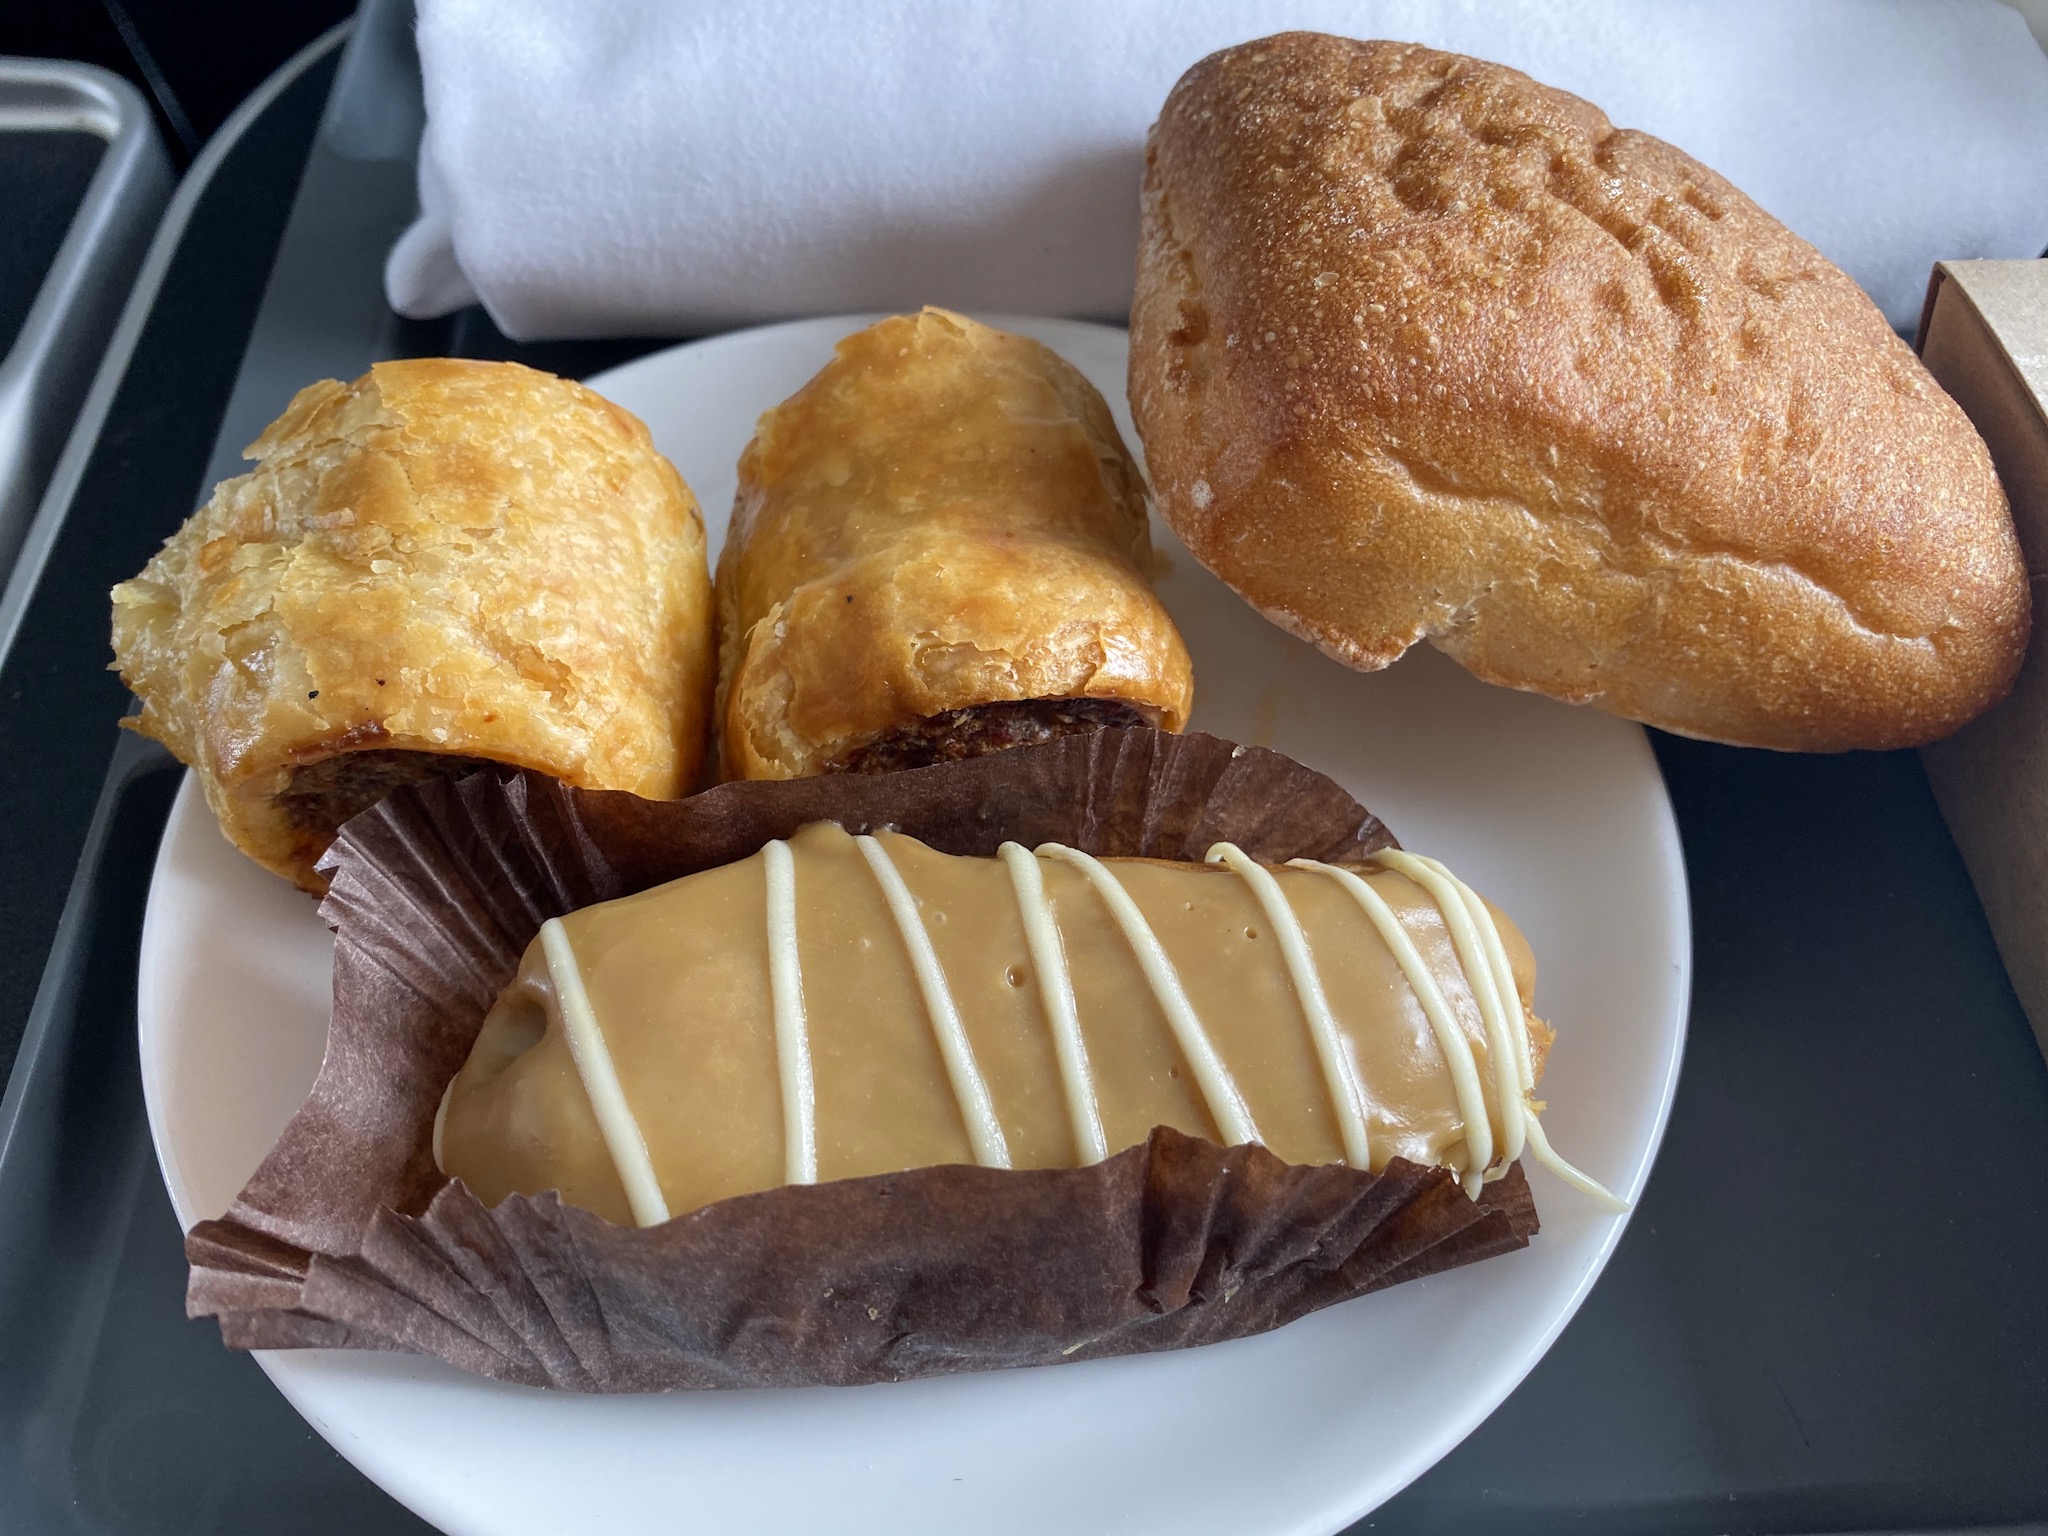 a plate of pastries and rolls